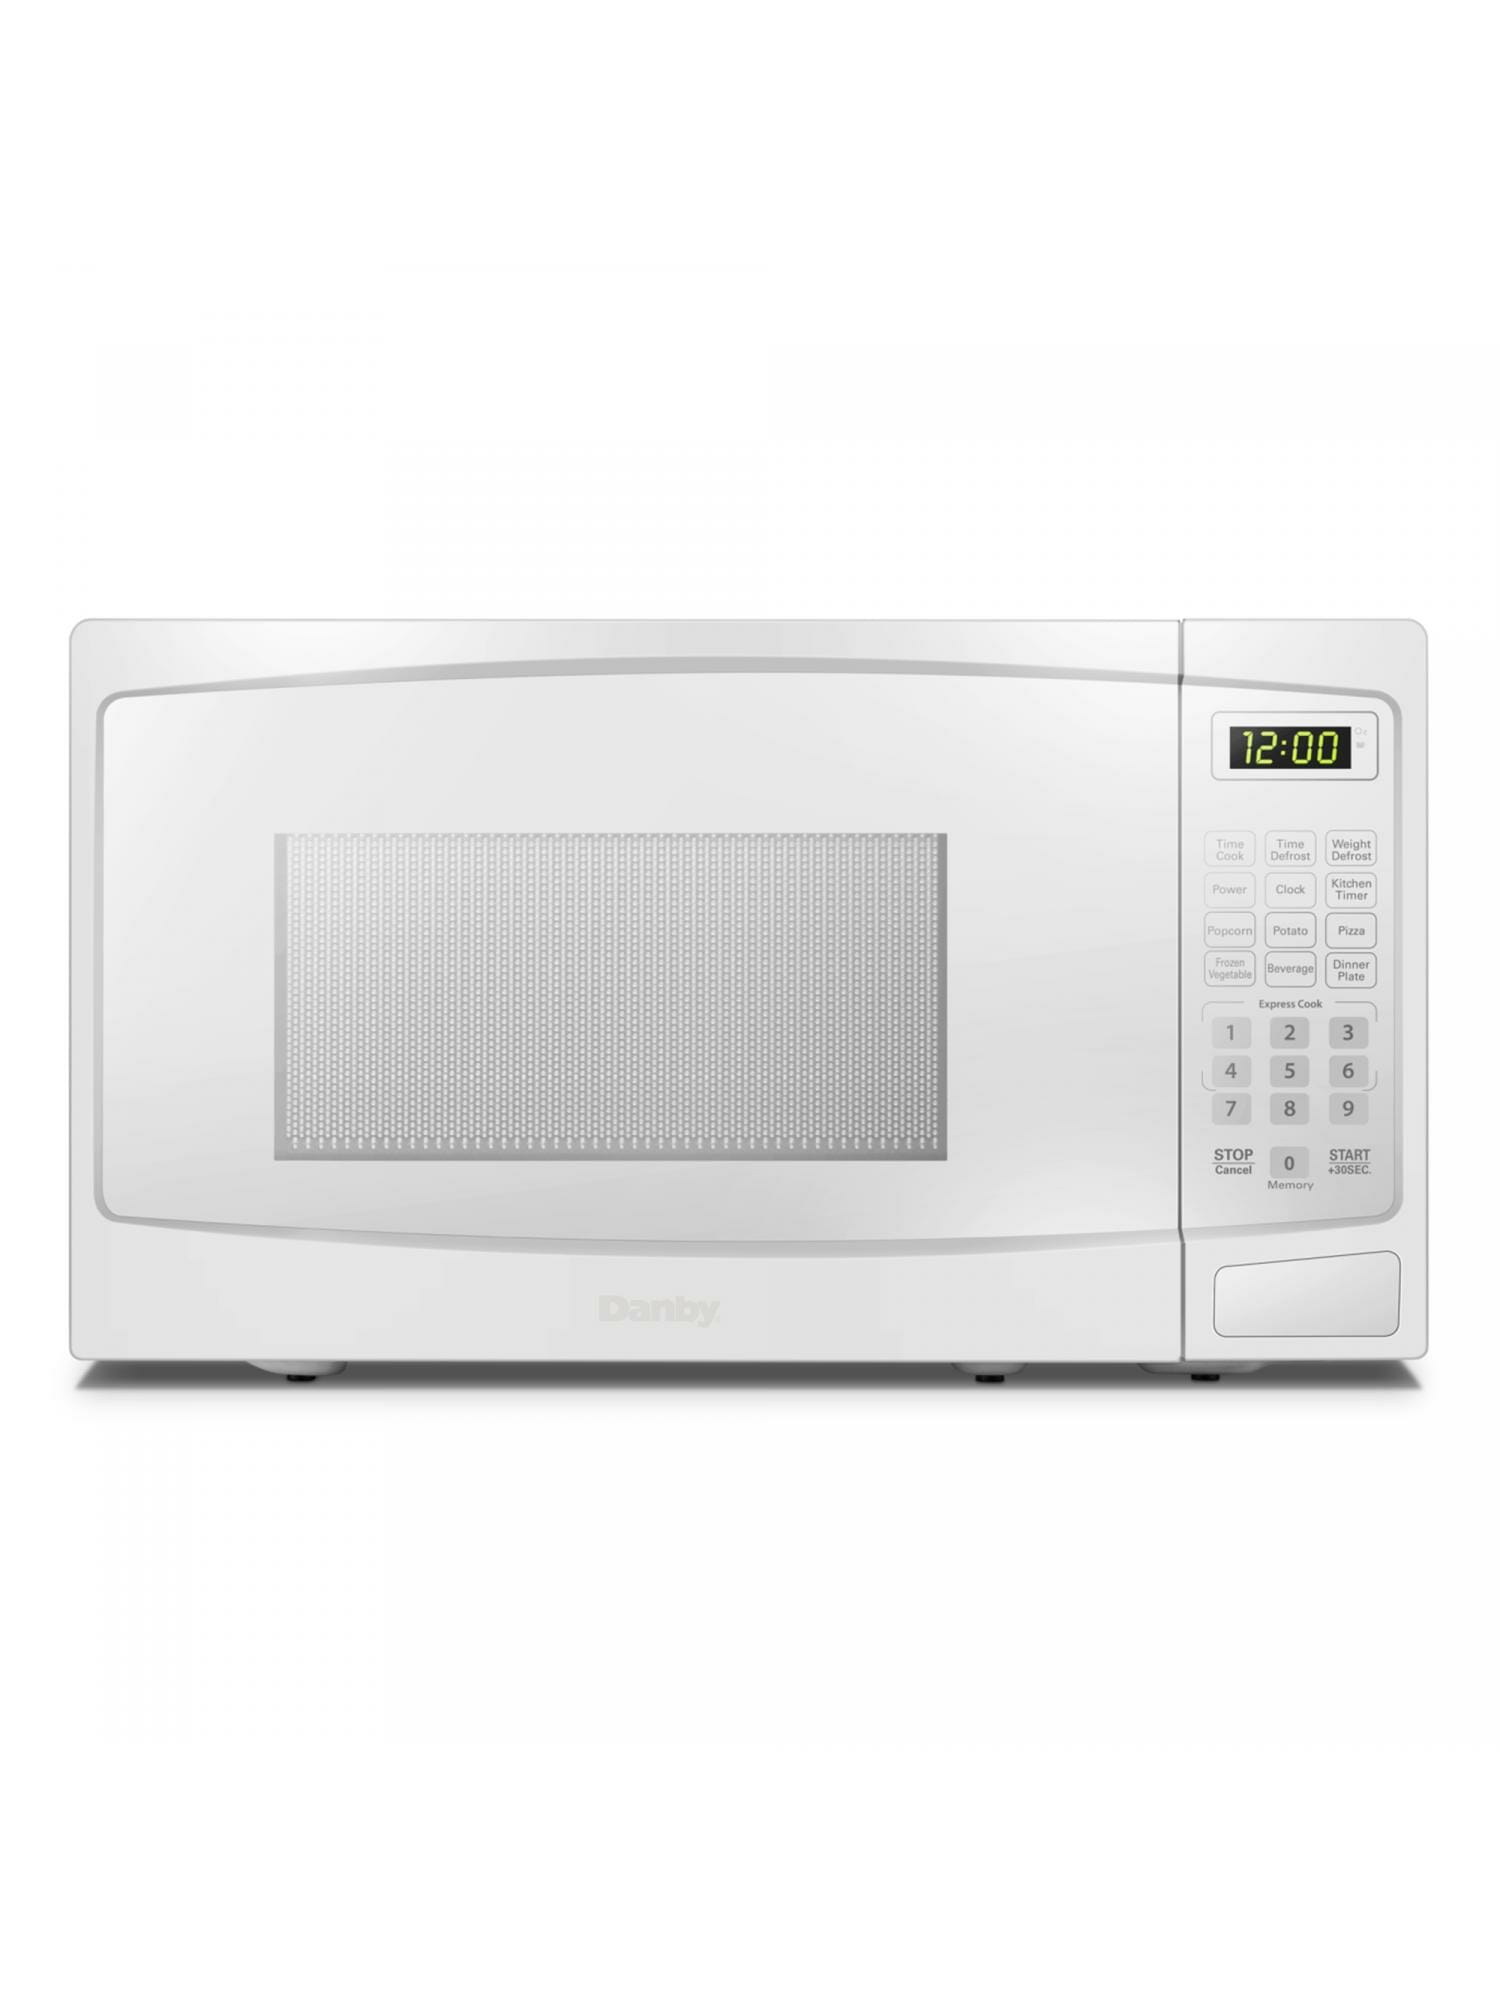 Danby - 1.1 cu. Ft  Counter top Microwave in White - DBMW1120BWW